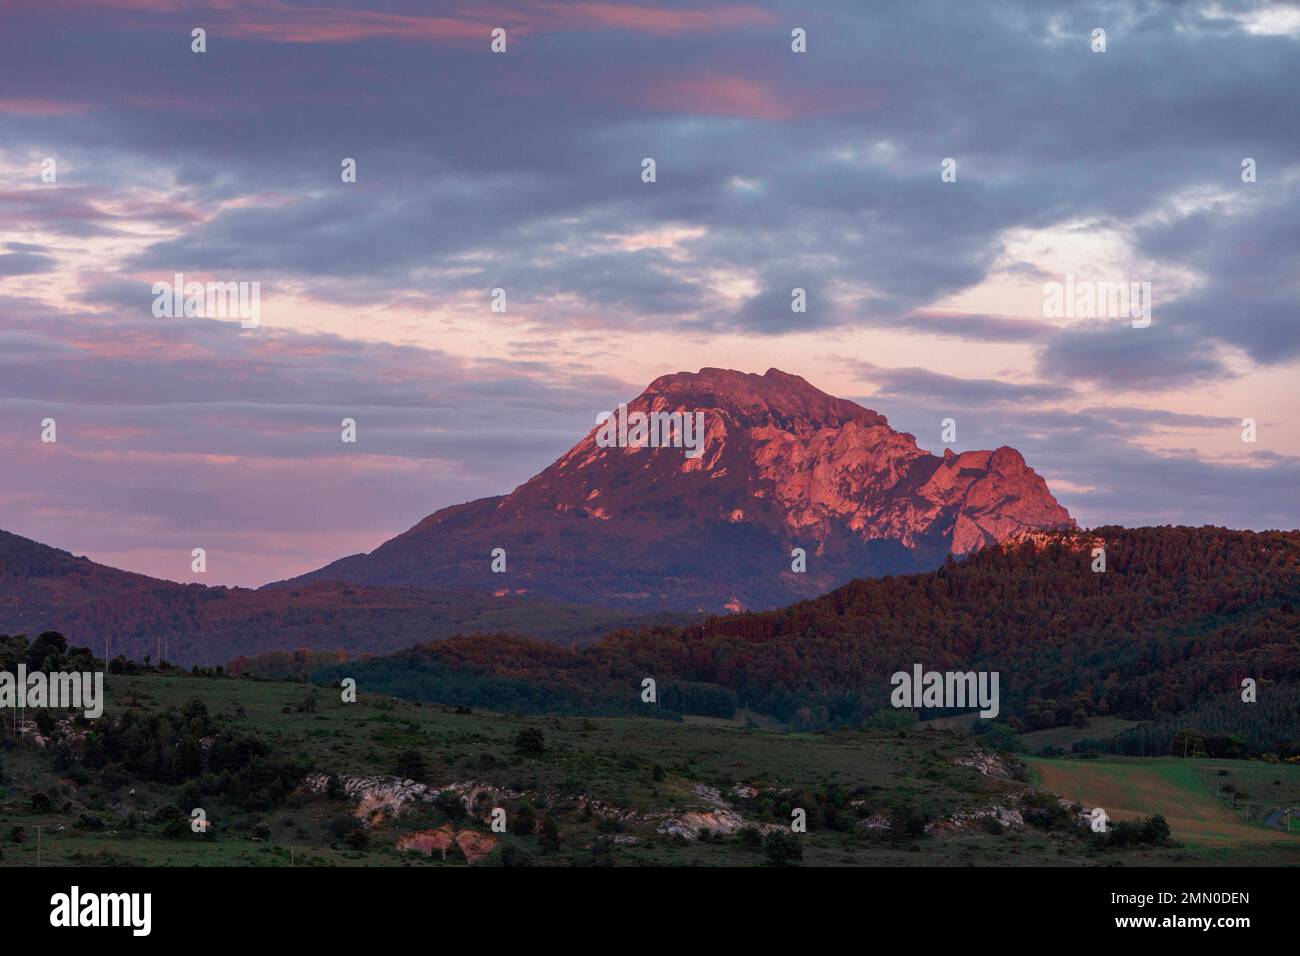 France, Aude, Rennes le Chateau, Mont Bugarach, mountain lit by the last rays of the sun under a cloudy sky Stock Photo